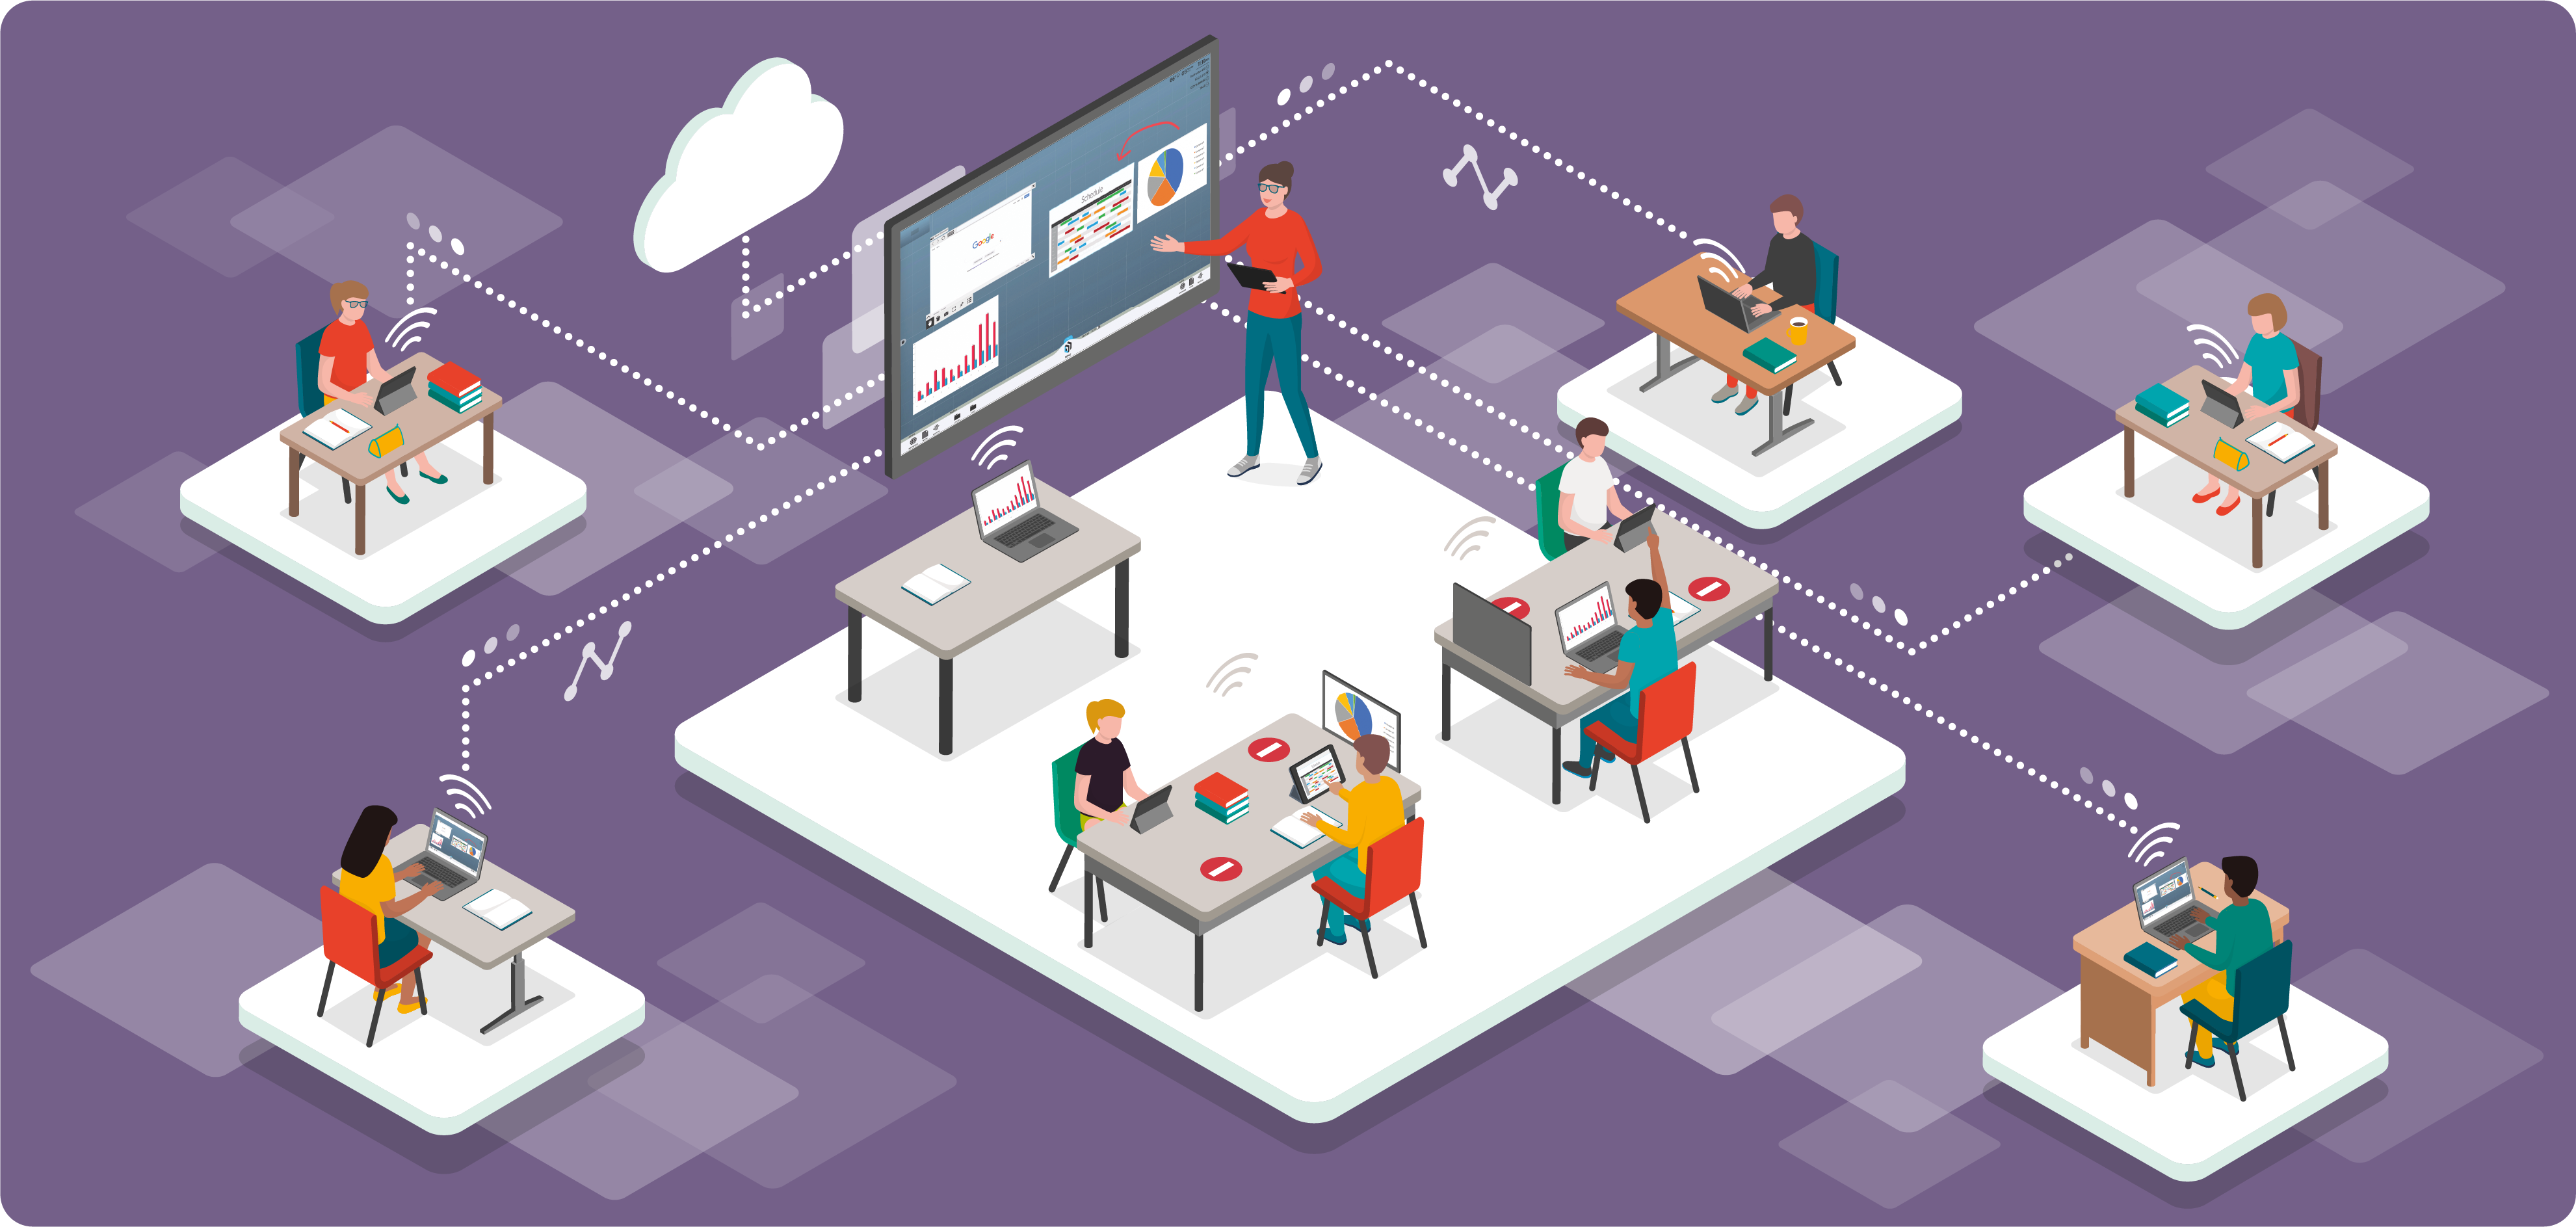 T1V-top-5-resources-to-teach-and-Learn-From-Anywhere-classroom-thinkhub--hybrid-classroom-active-learning-remote-distance-learning-teaching-purple-background